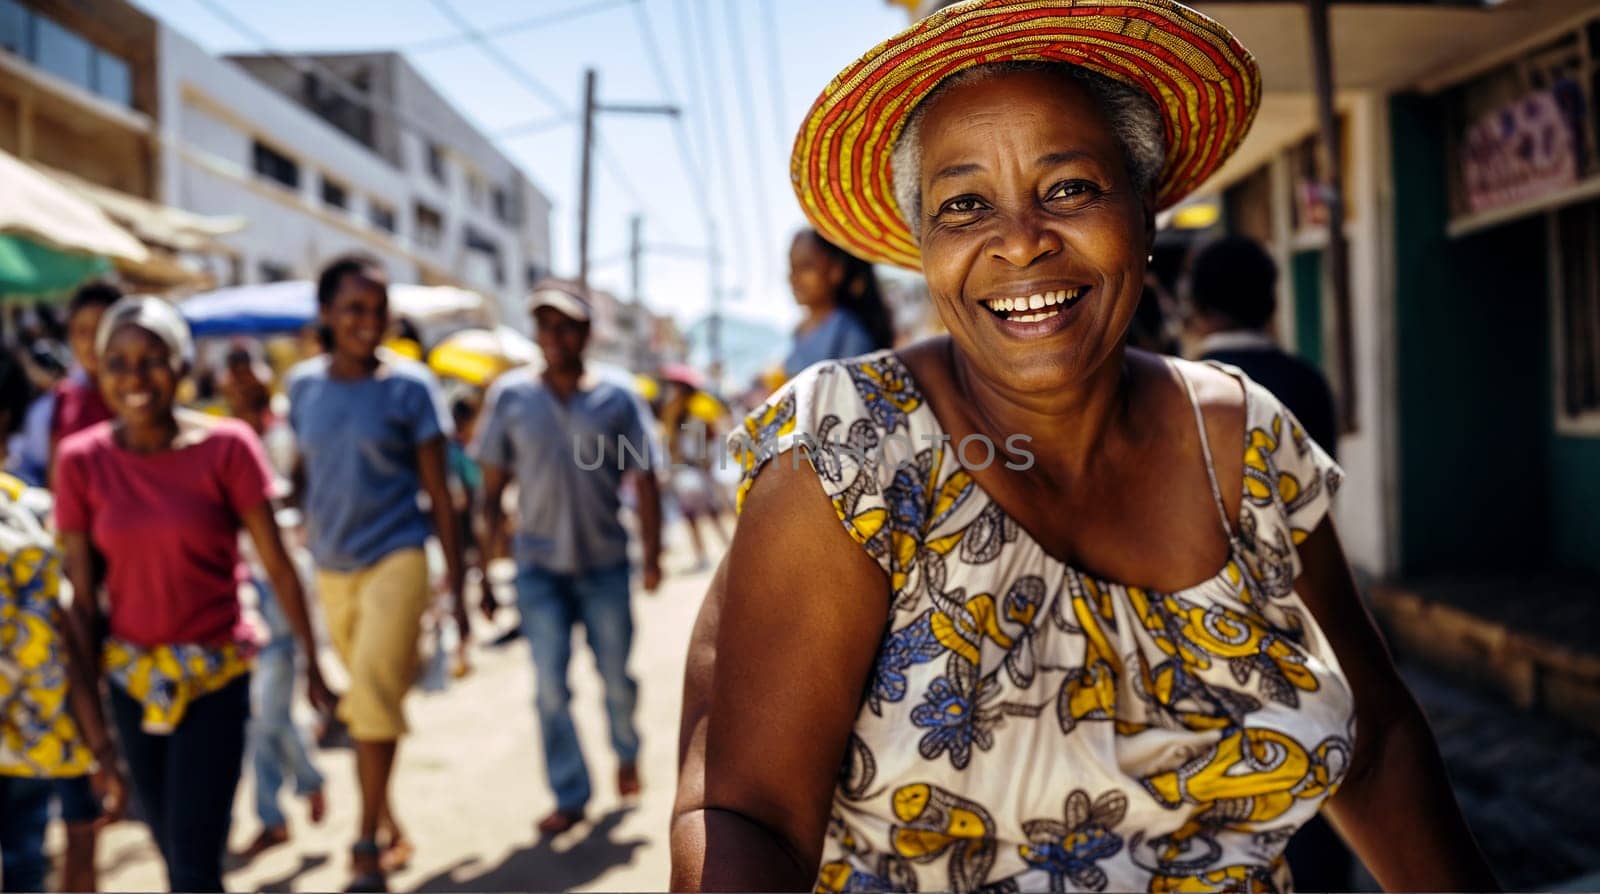 Joyful African Woman with Colorful Hat in Busy Street Market by chrisroll